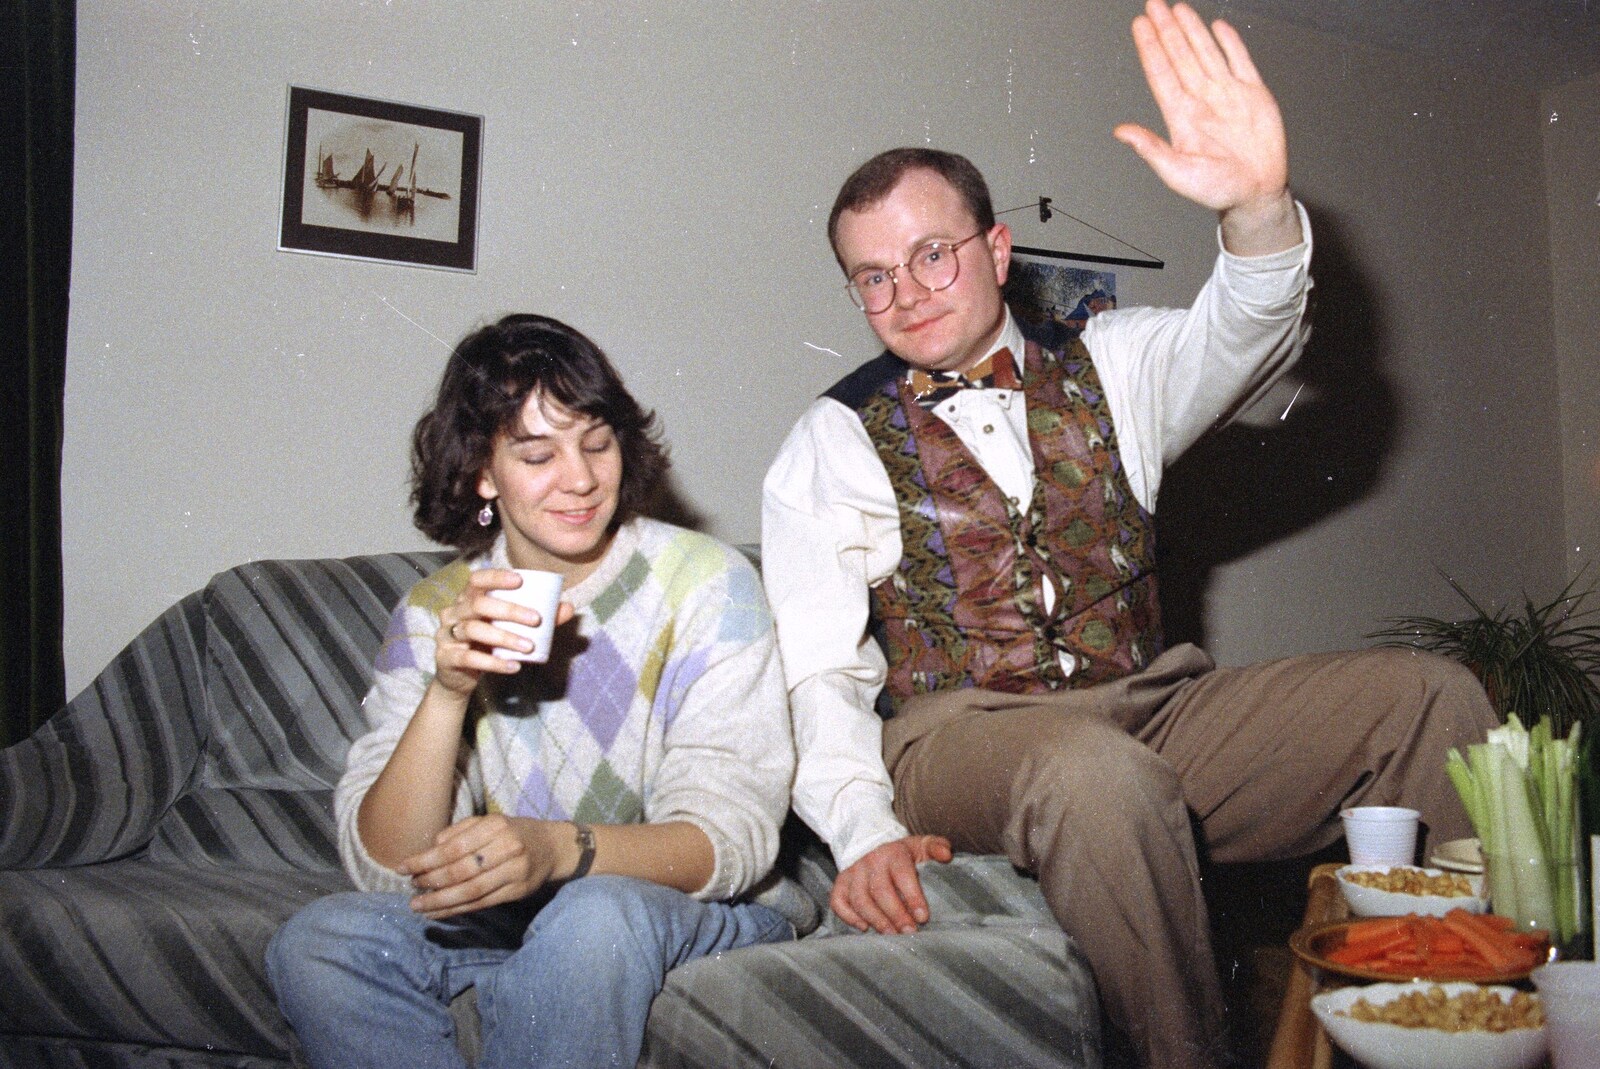 Hamish's Oxford Party, Oxfordshire - 25th April 1992: Talk to the hand, the waistcoat aint listenin'